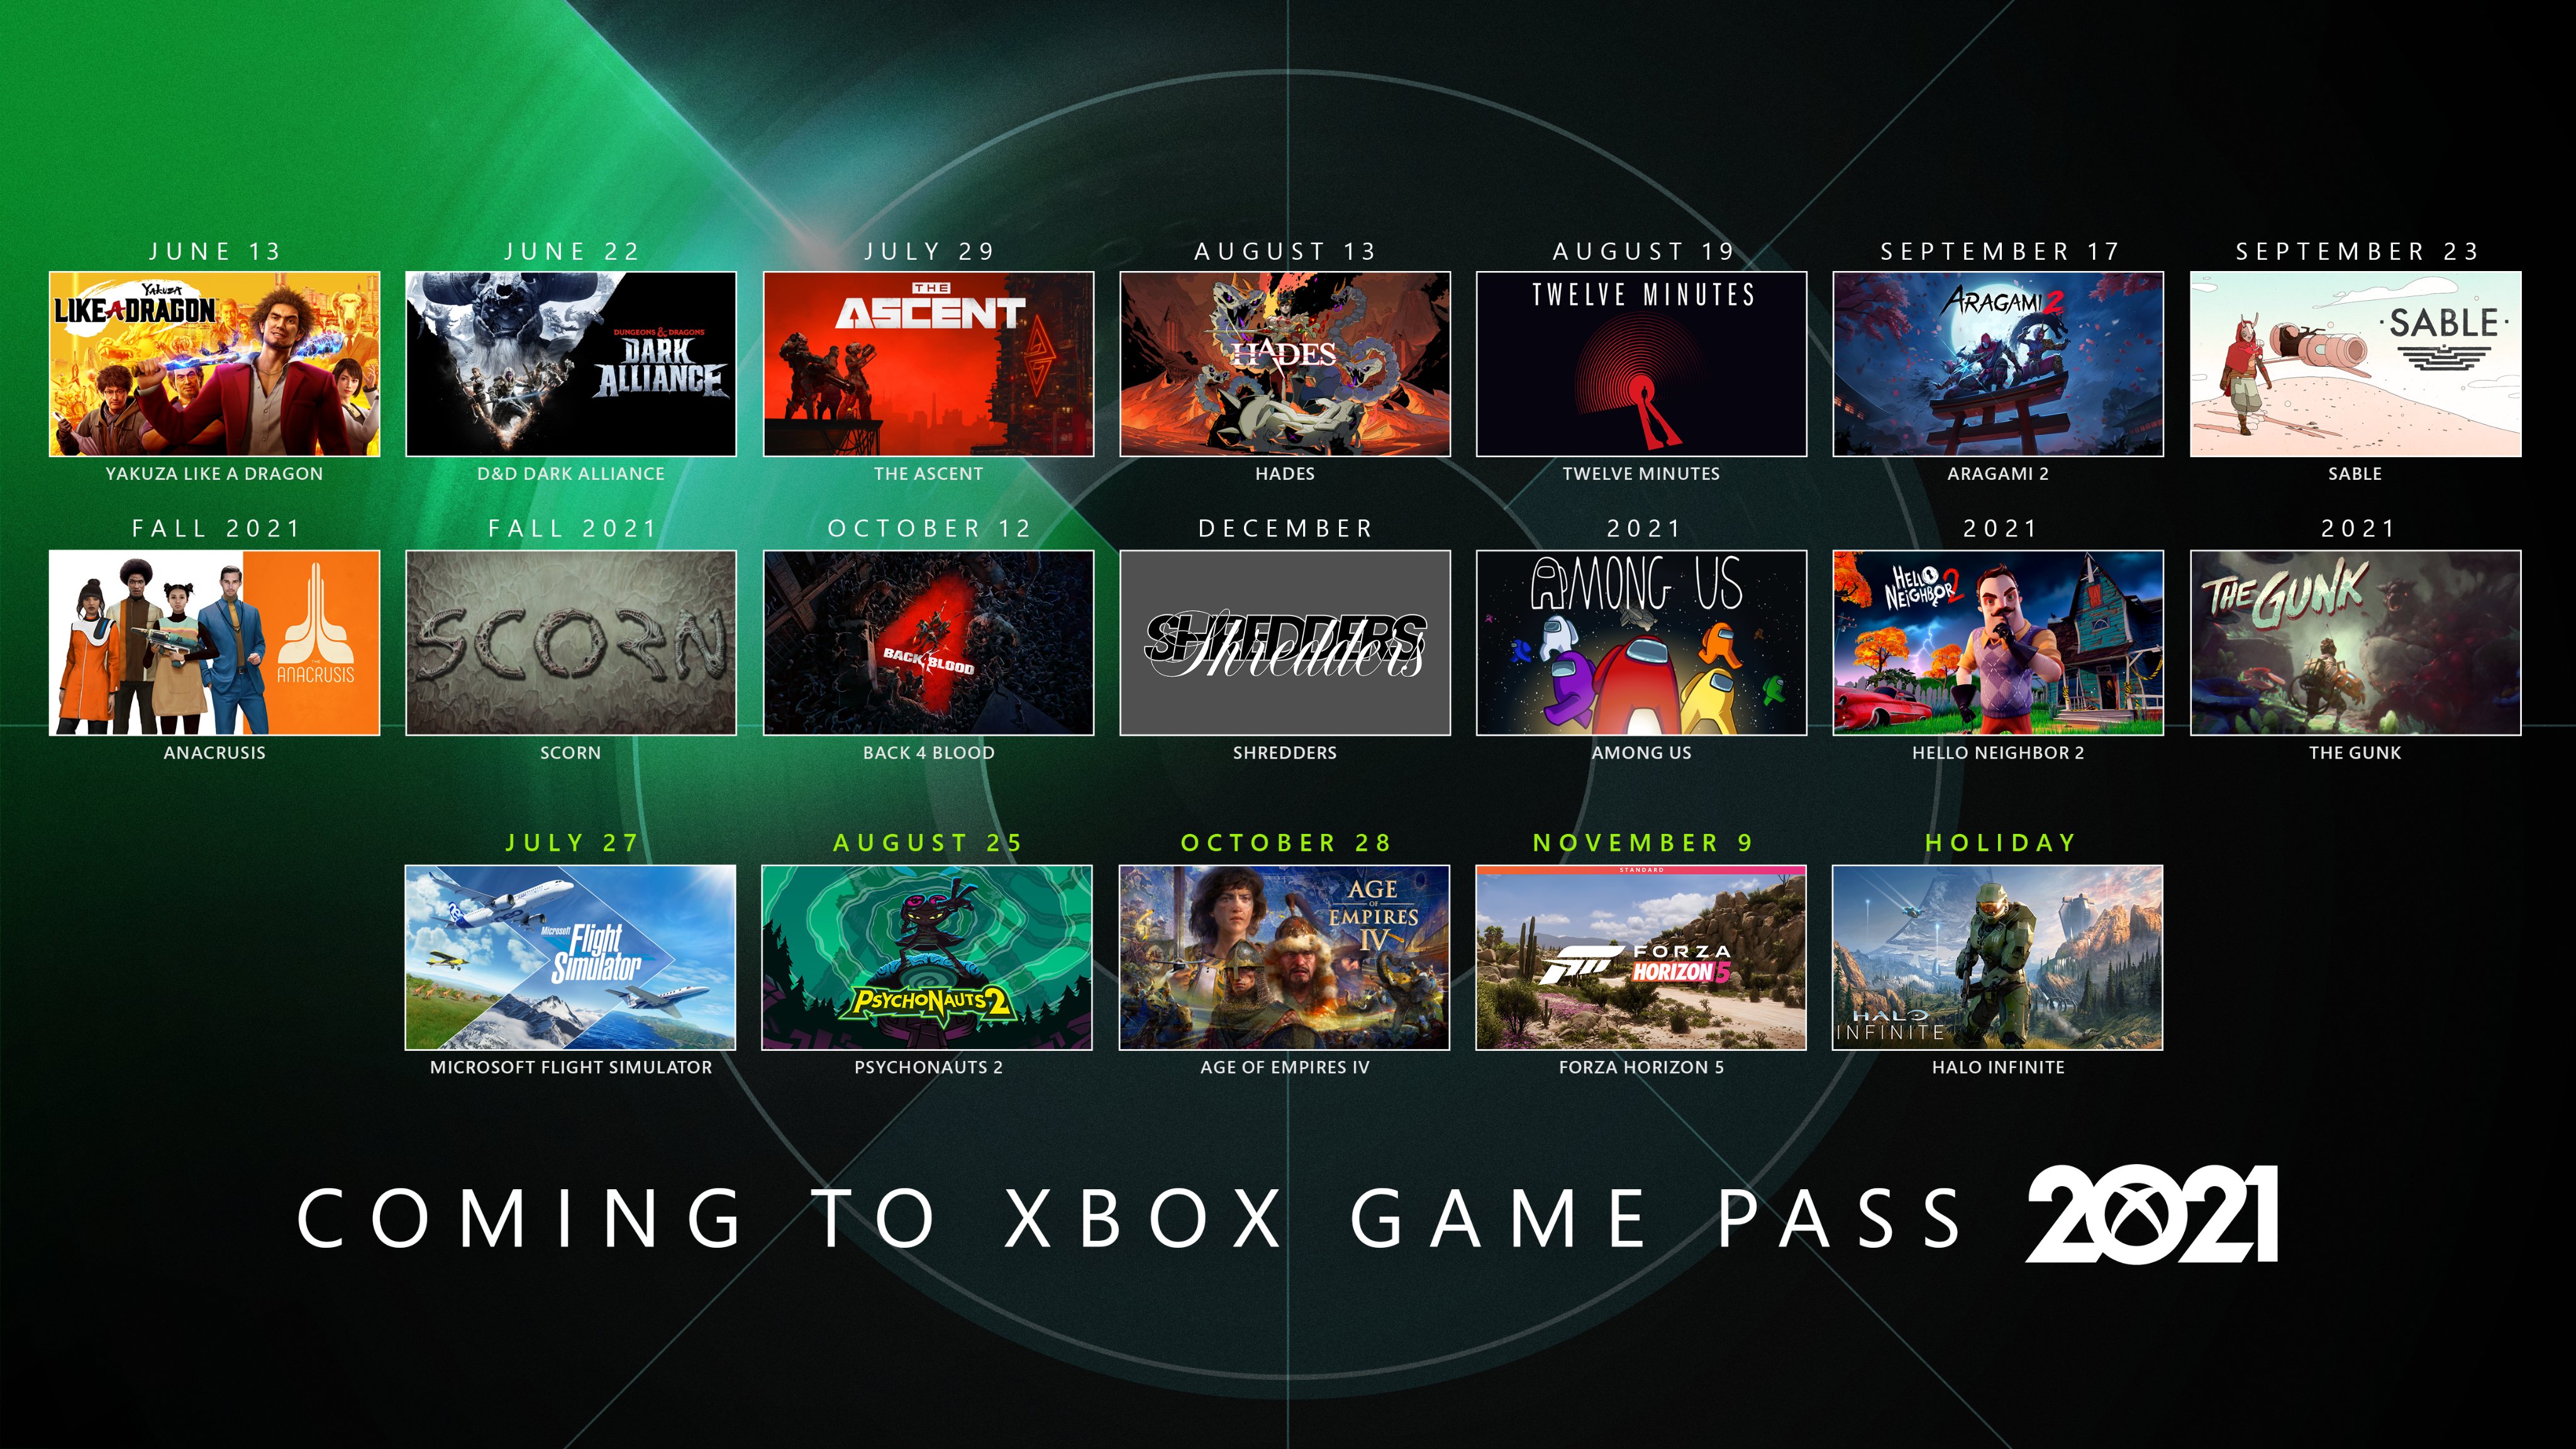 The Future of Xbox's dominant First Party and the GamePass revolution